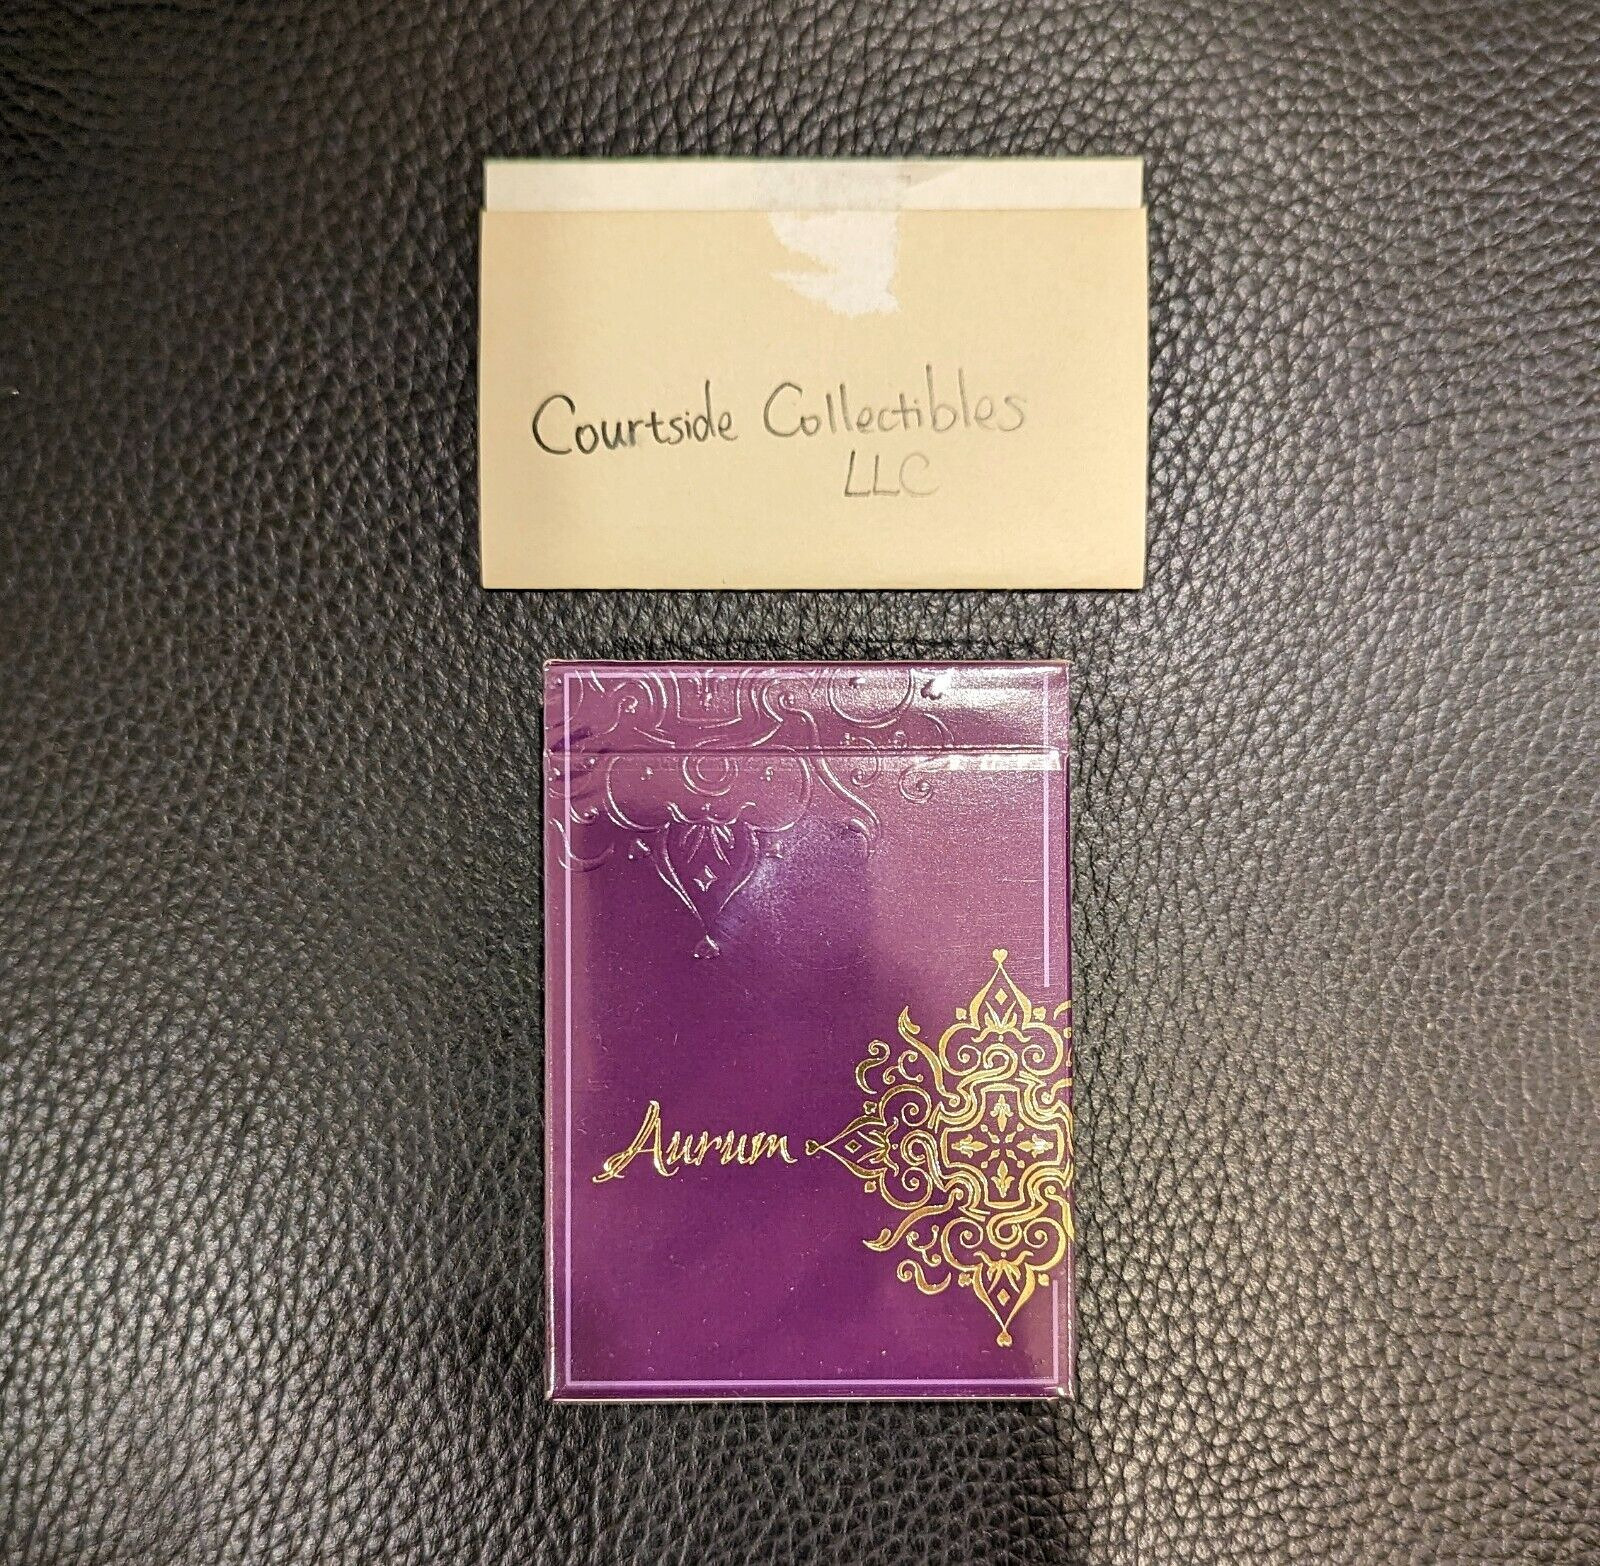 New Aurum Playing Cards Sovereign Edition Encarded Paul Carpenter Cardistry Deck